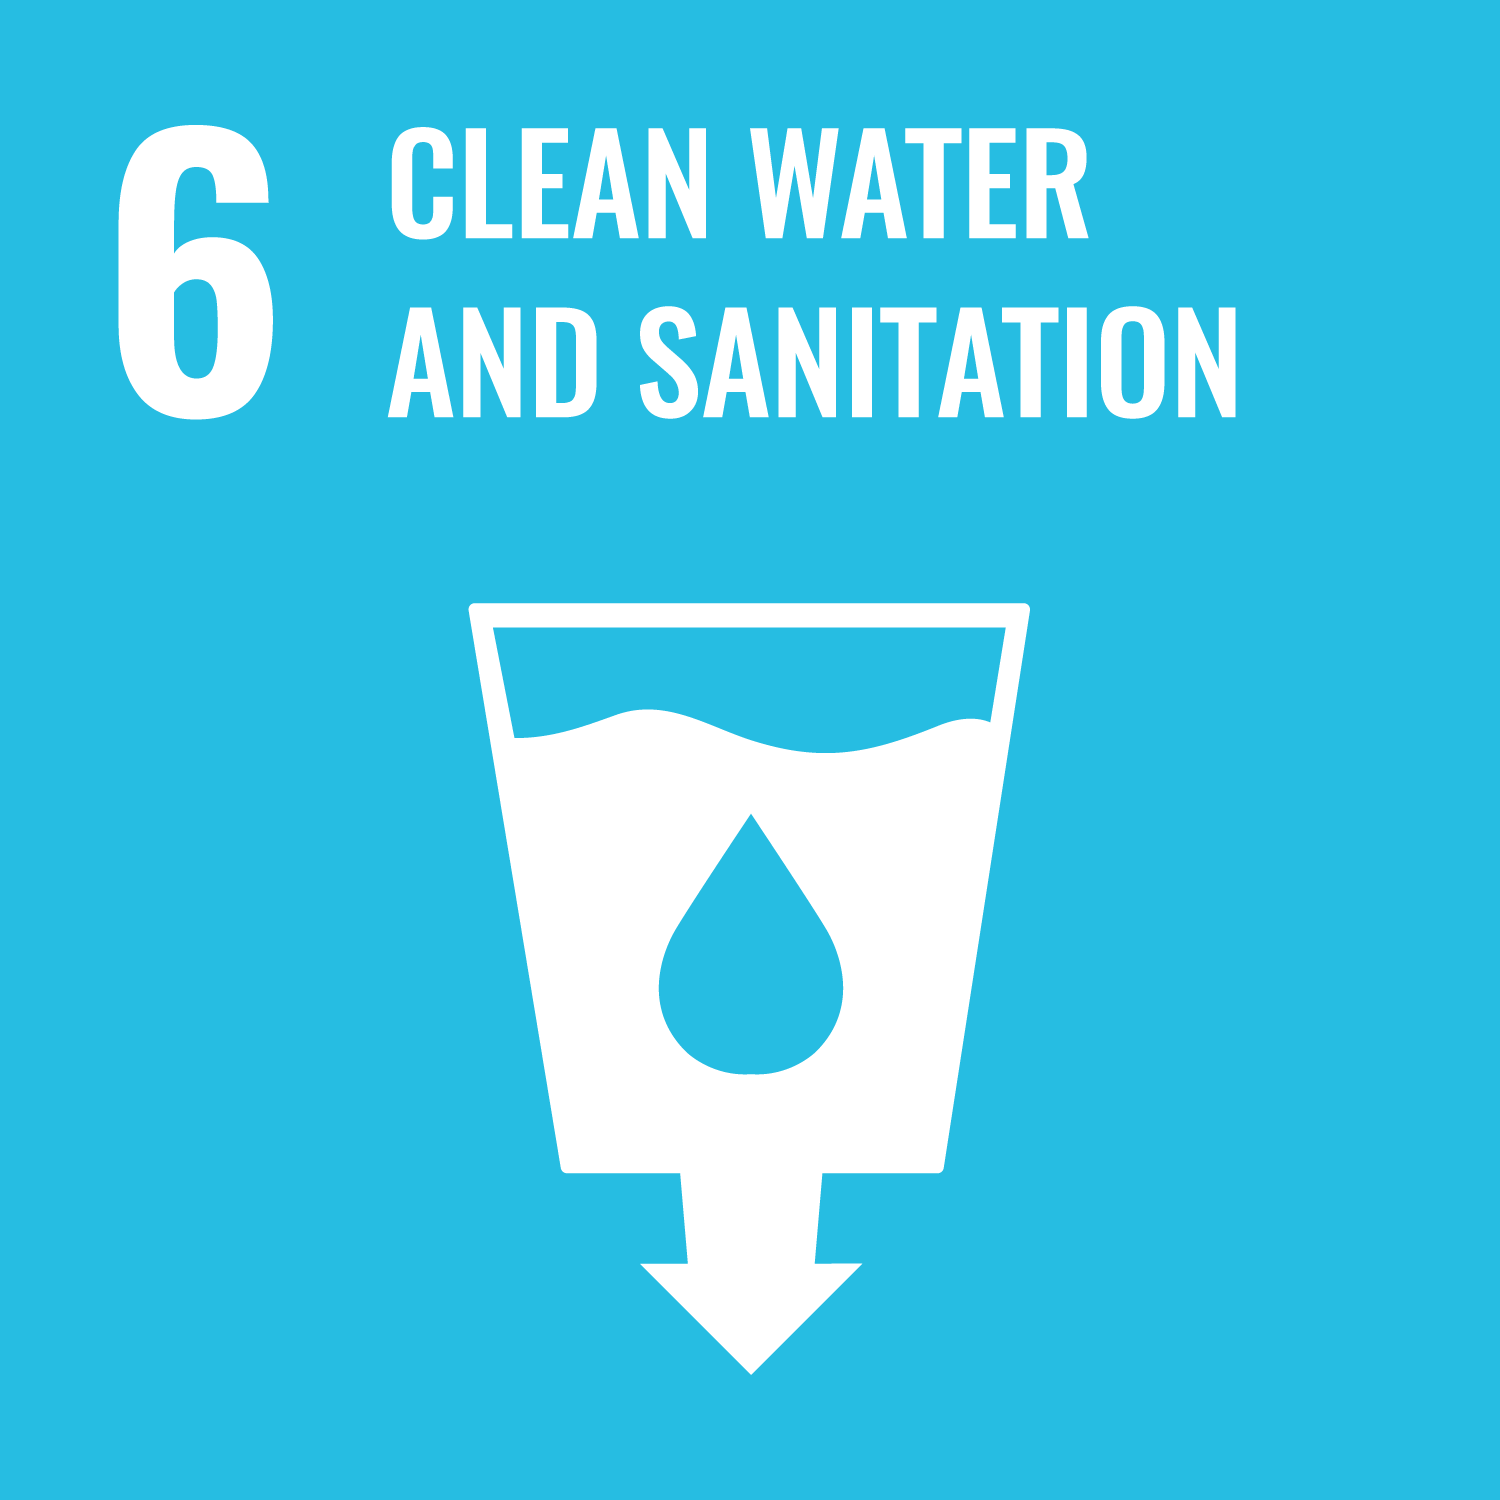 Card 6: Clean Water And Sanitation